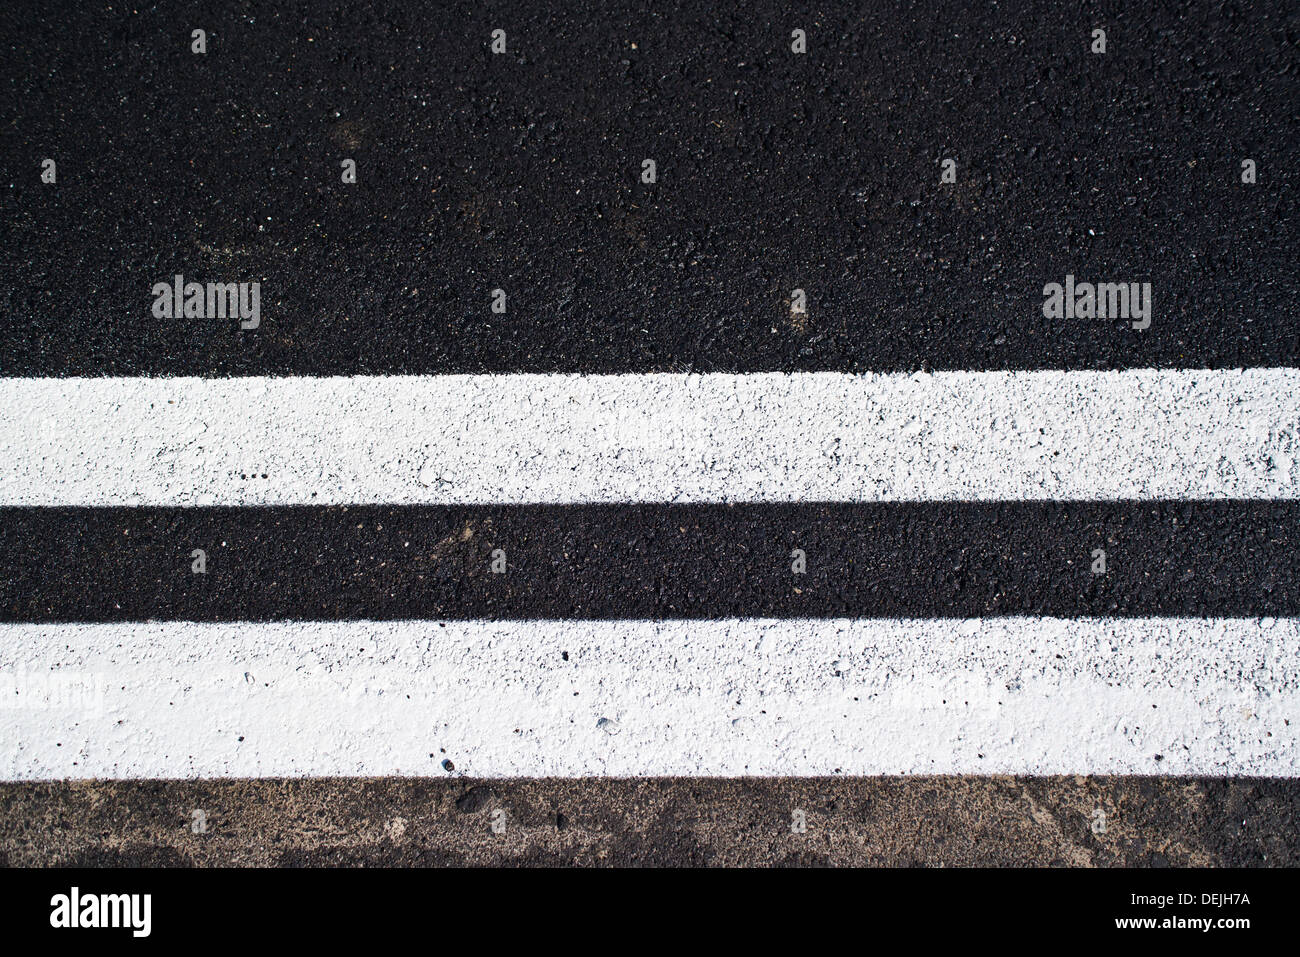 Road marking - Double lines on the asphalt road Stock Photo